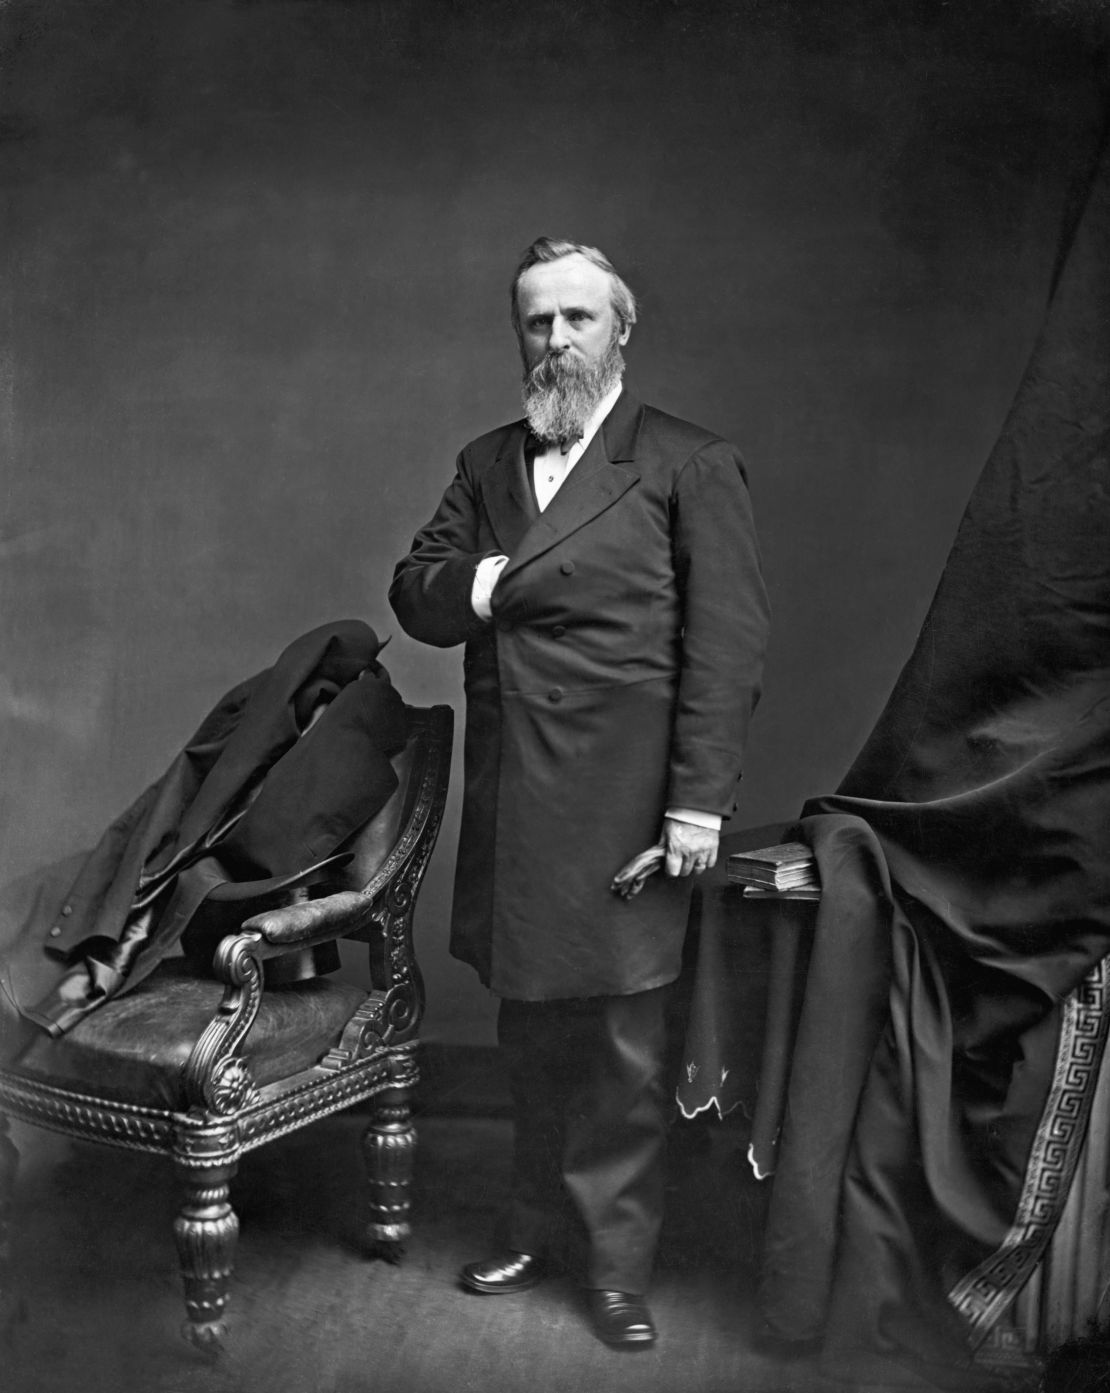 President Rutherford B. Hayes pulled federal troops who were helping support Reconstruction efforts in the South.